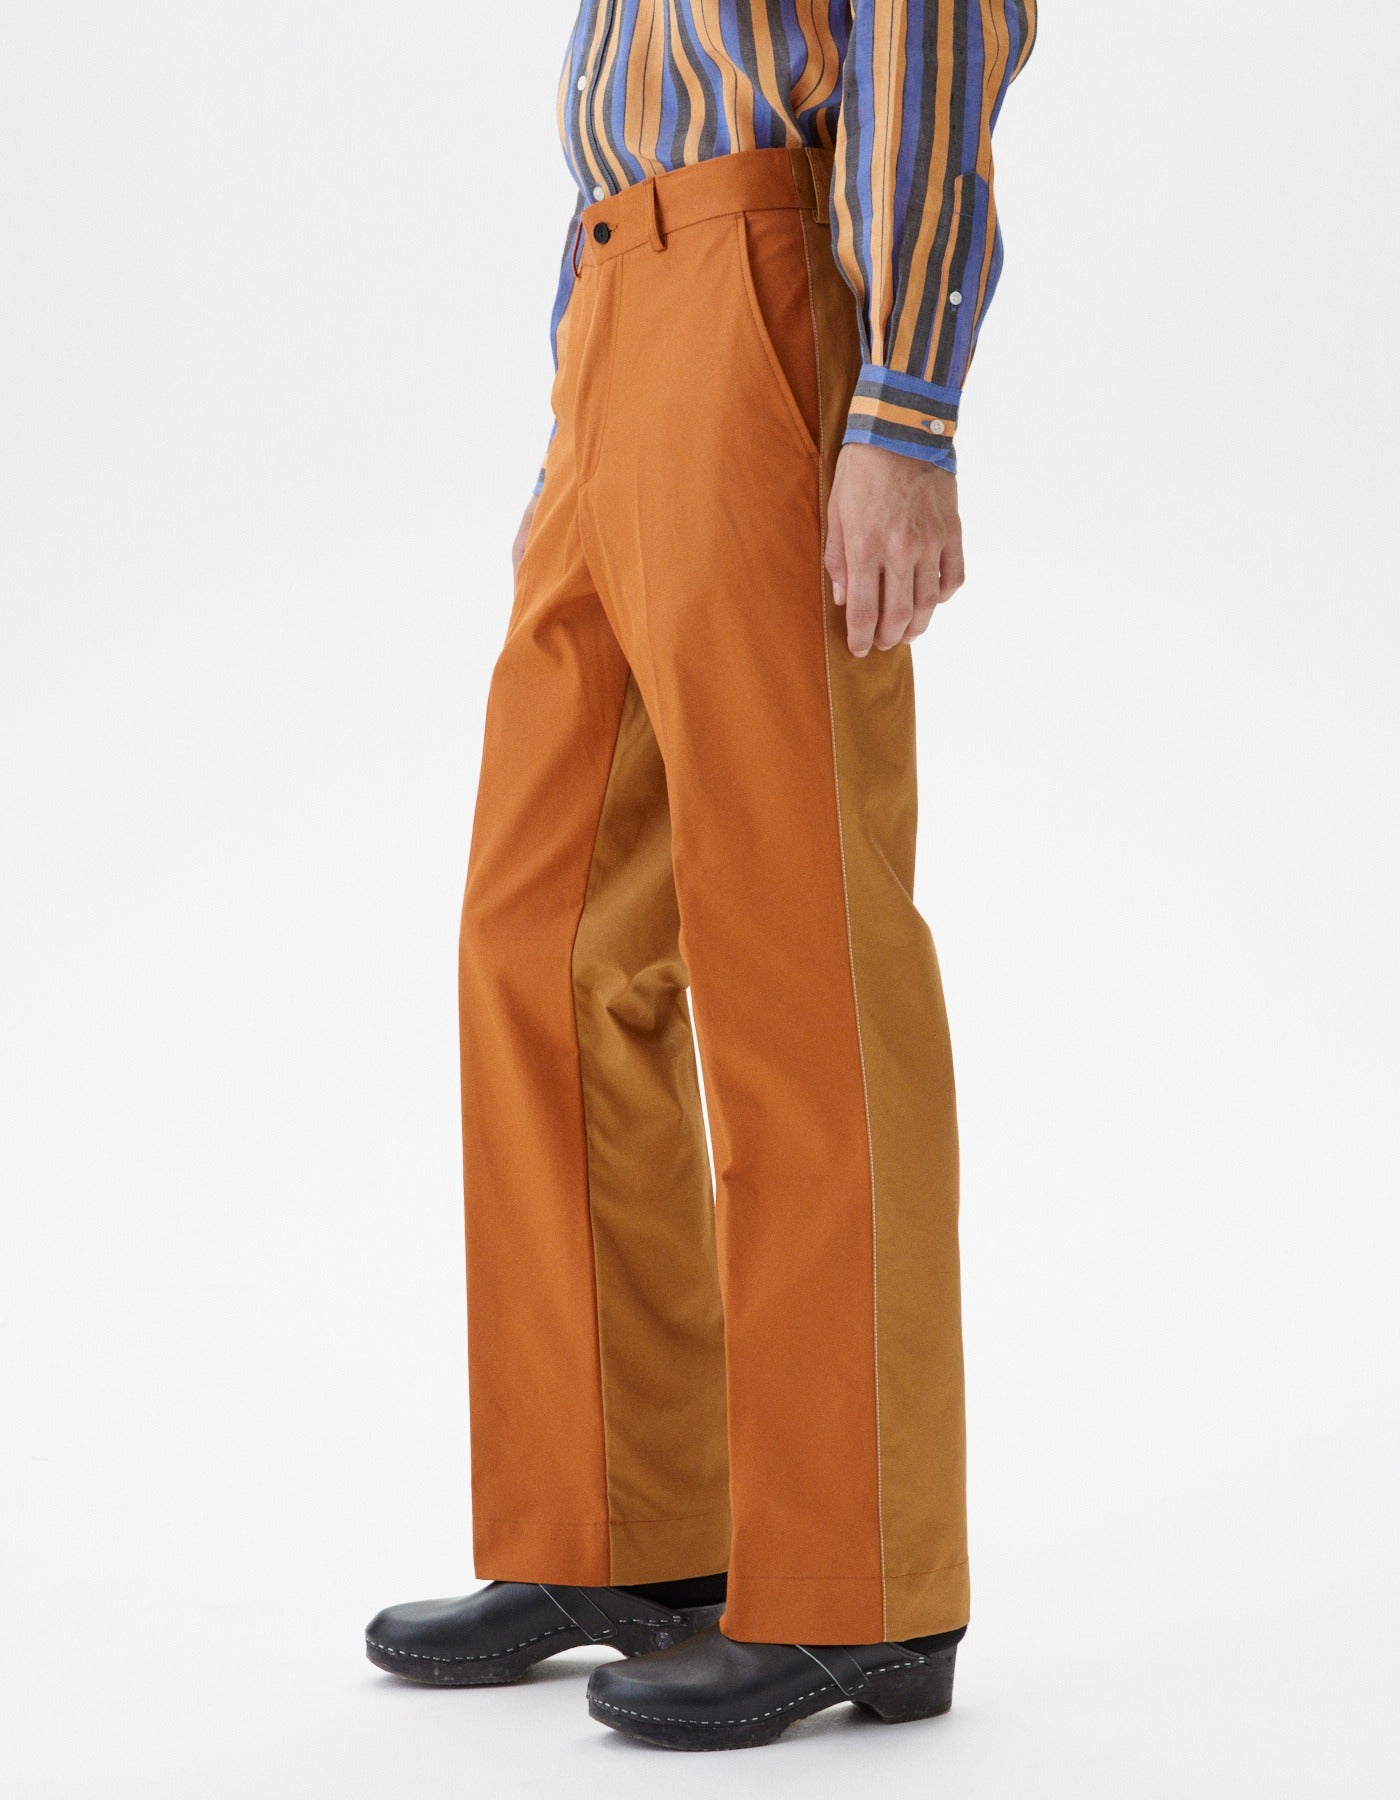 TROUSERS DALET TWO TONED – Schnayderman's